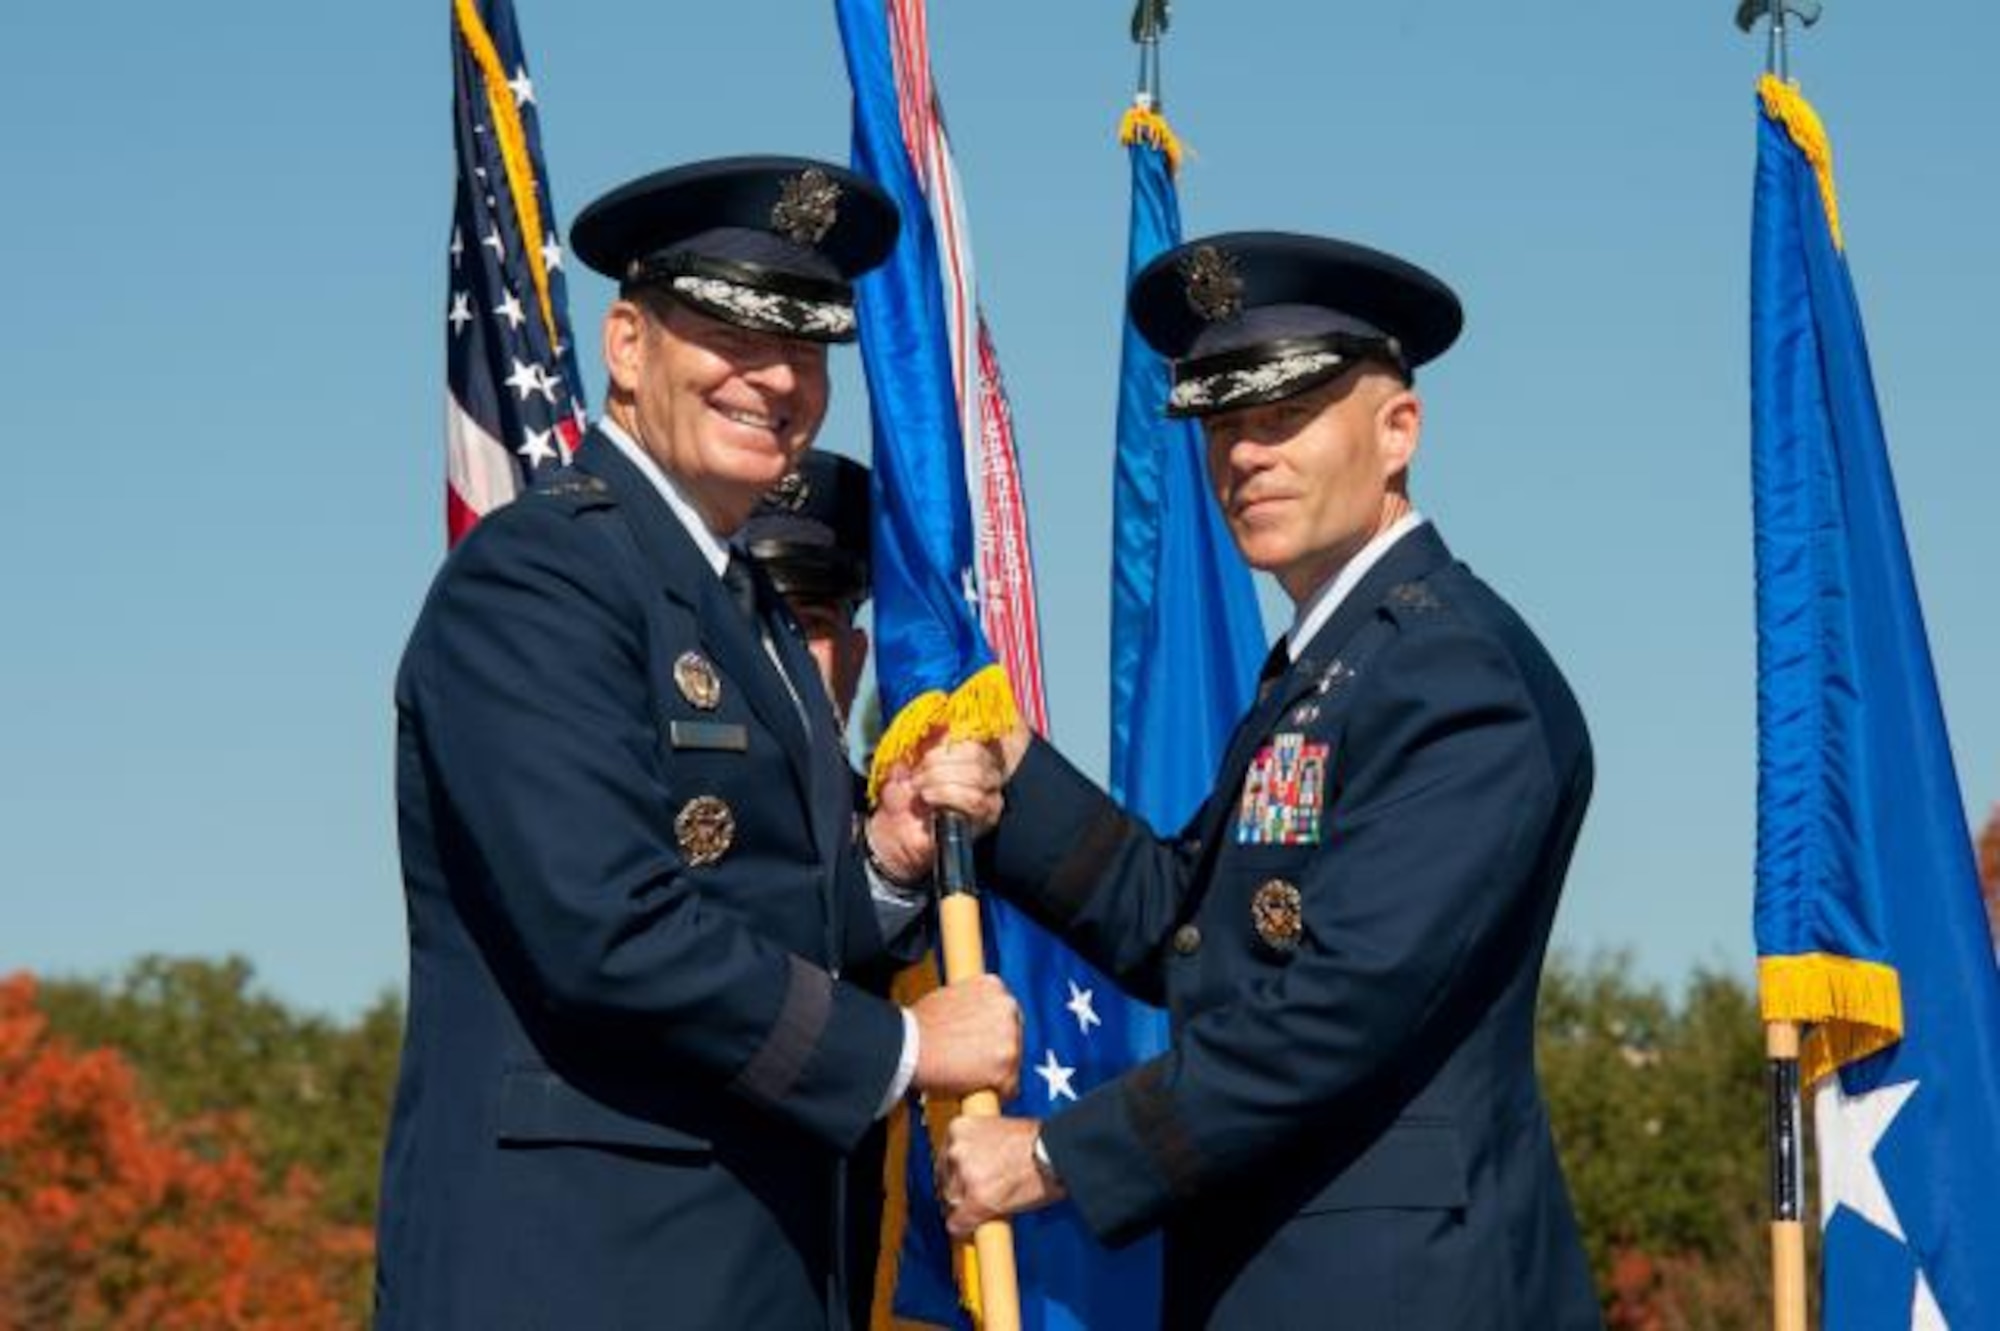 General Robin Rand, commander Air Education and Training Command, hands the Air University guidon to the university’s new commander and president, Lt. Gen. Steven Kwast, during a change of command ceremony, Nov. 10, 2014, at Maxwell Air Park. (Photo by Melanie Rodgers Cox)

